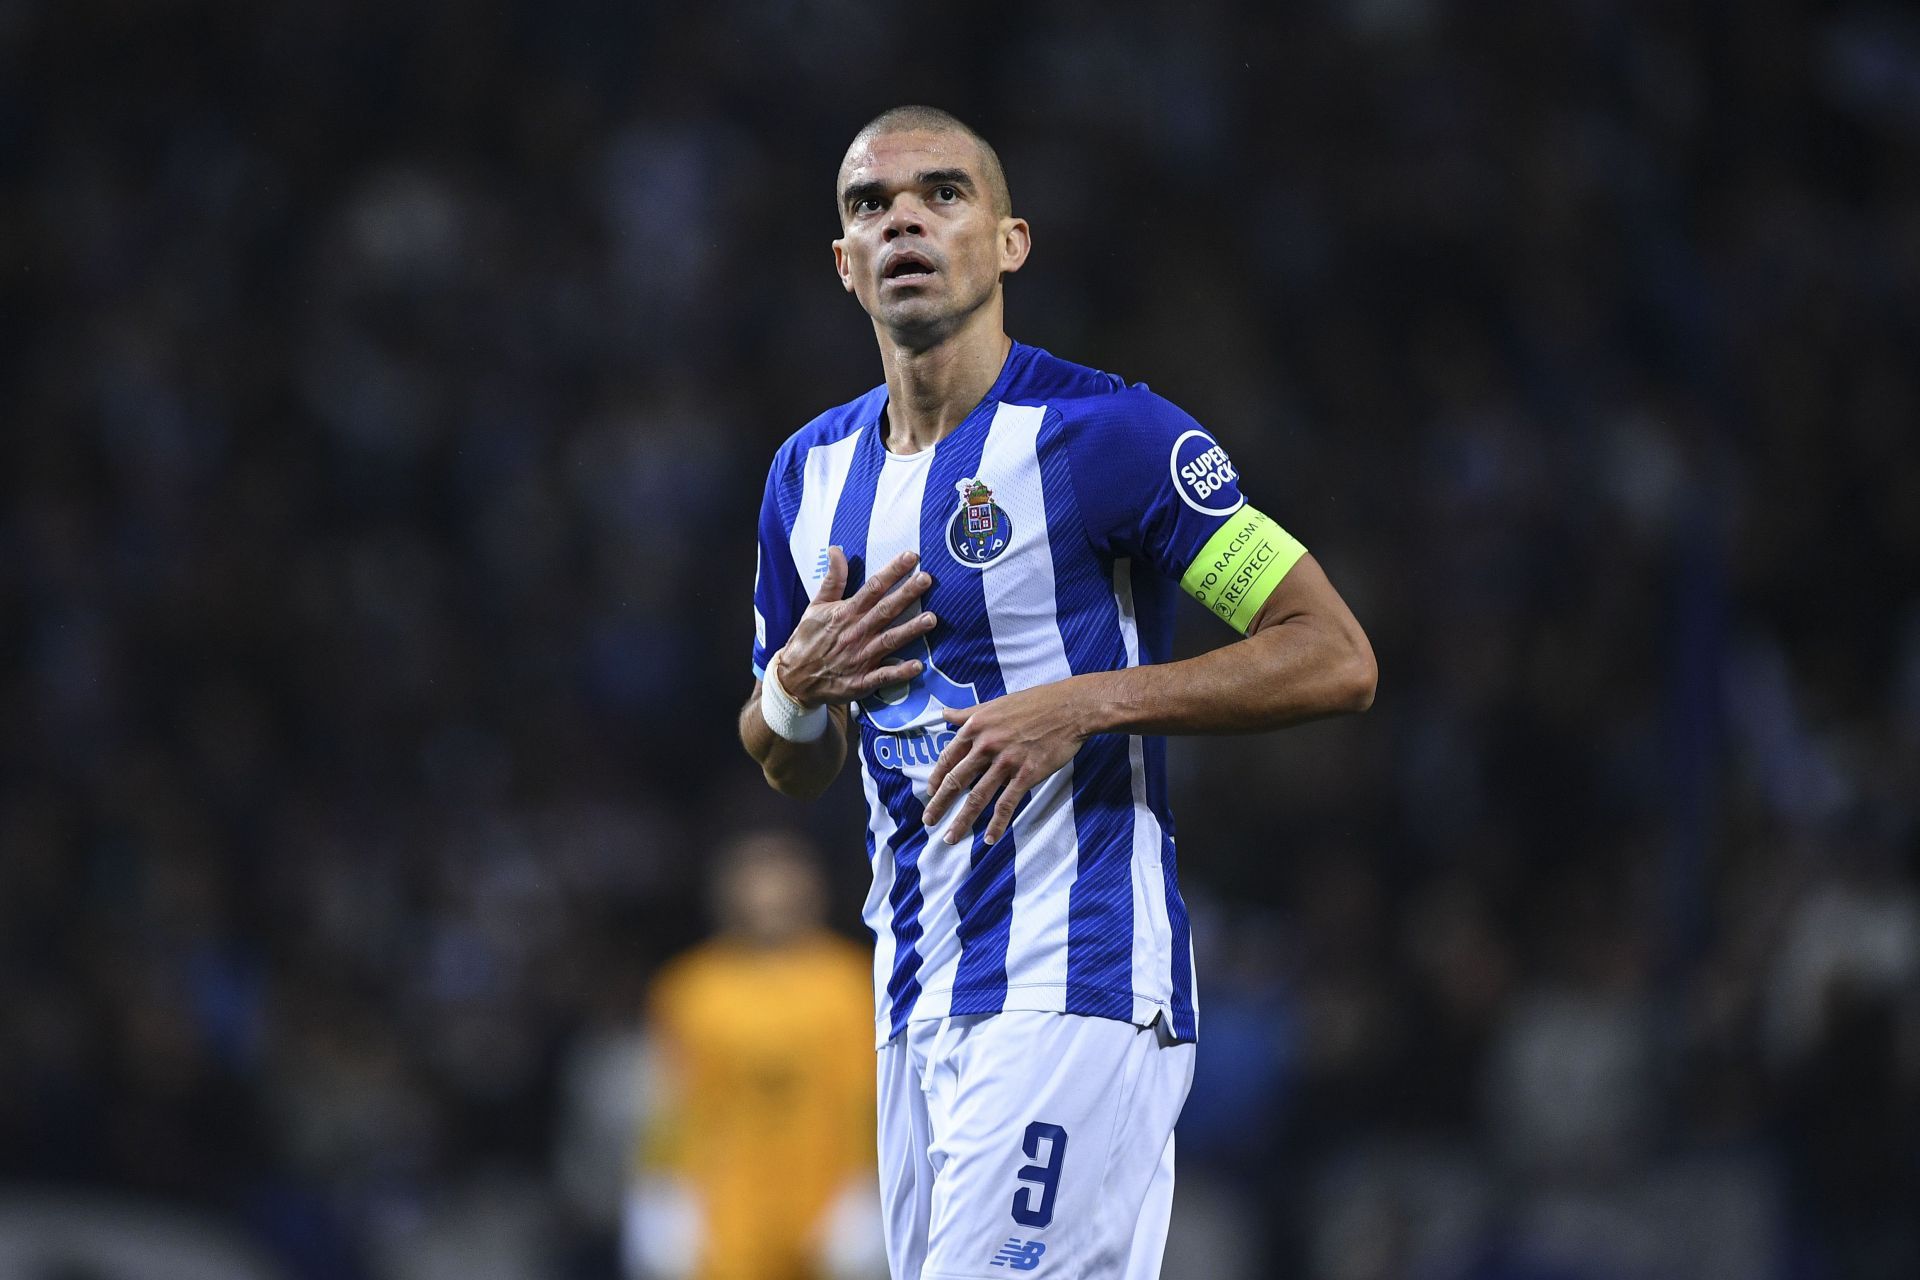 Porto host Famalicao in their upcoming League fixture on Sunday